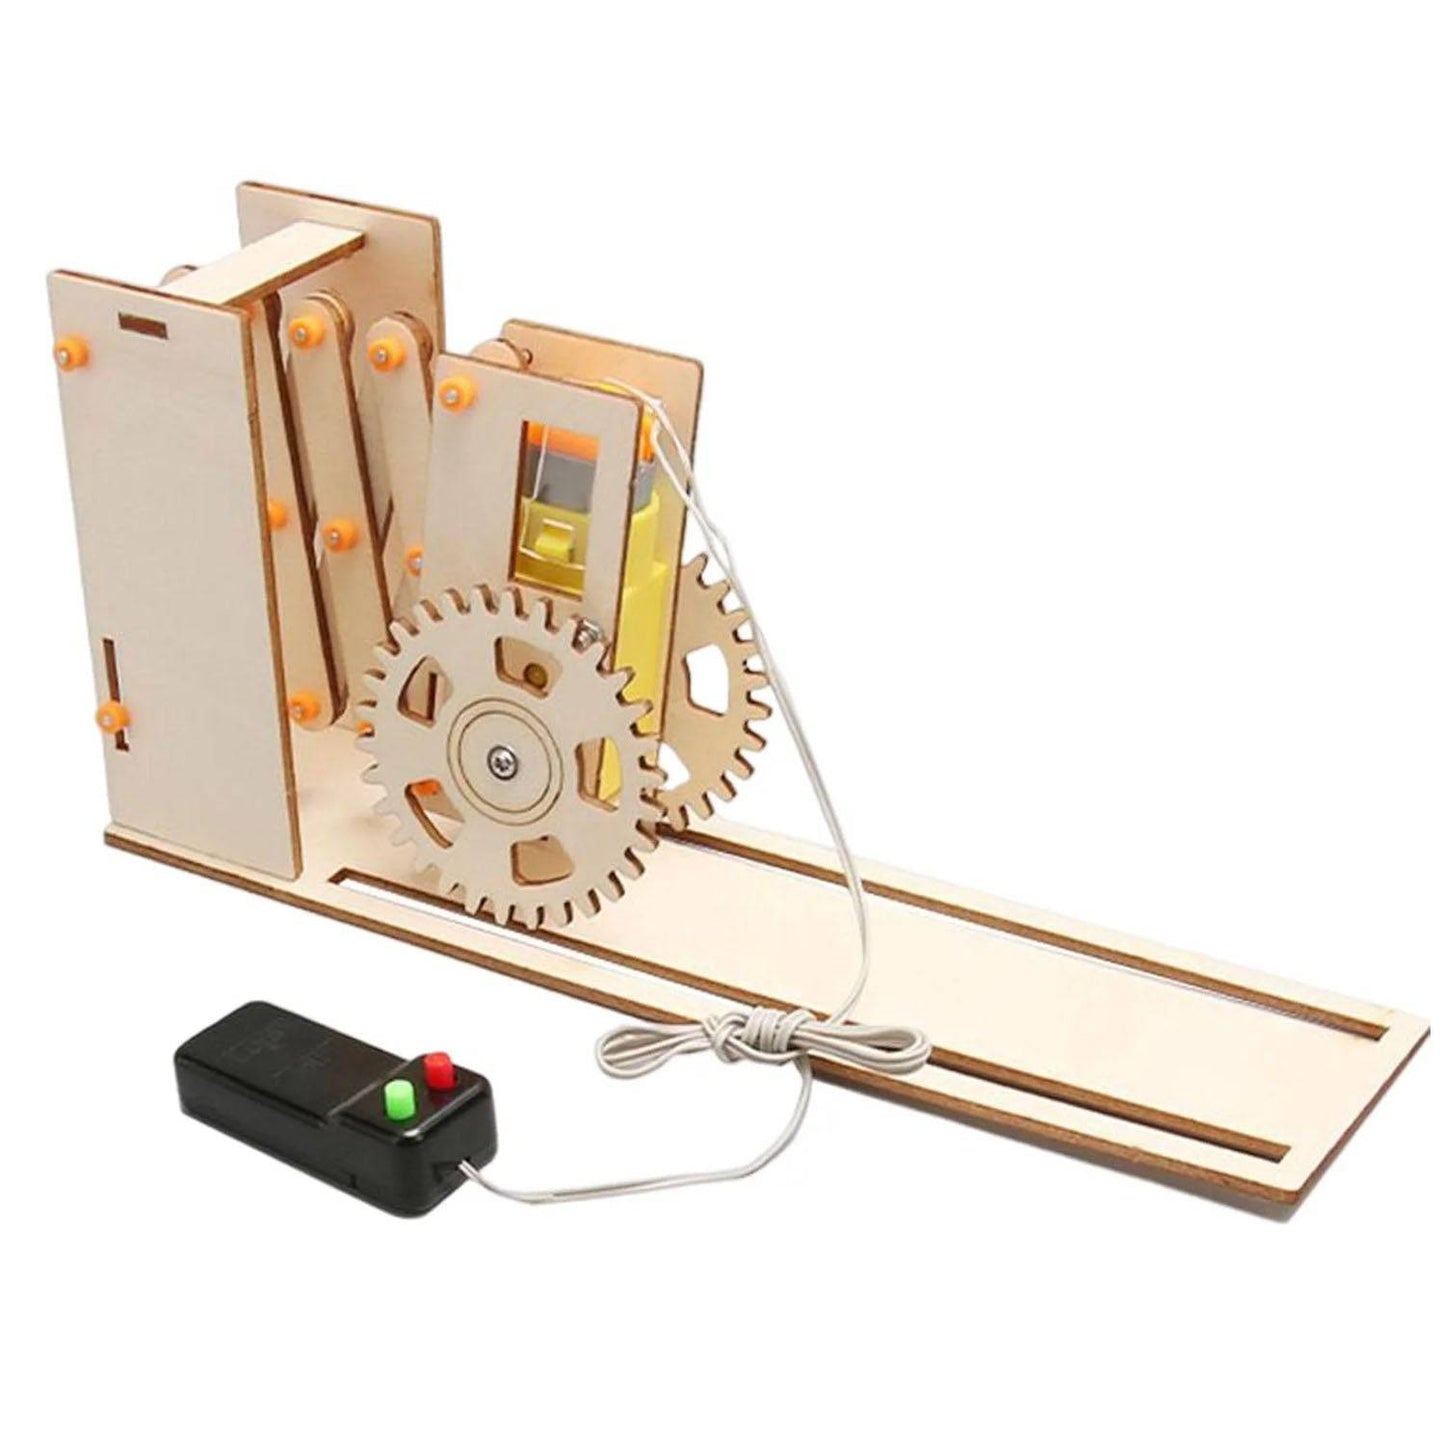 DIY Retractable Gate Stem Kit Teaching Projects